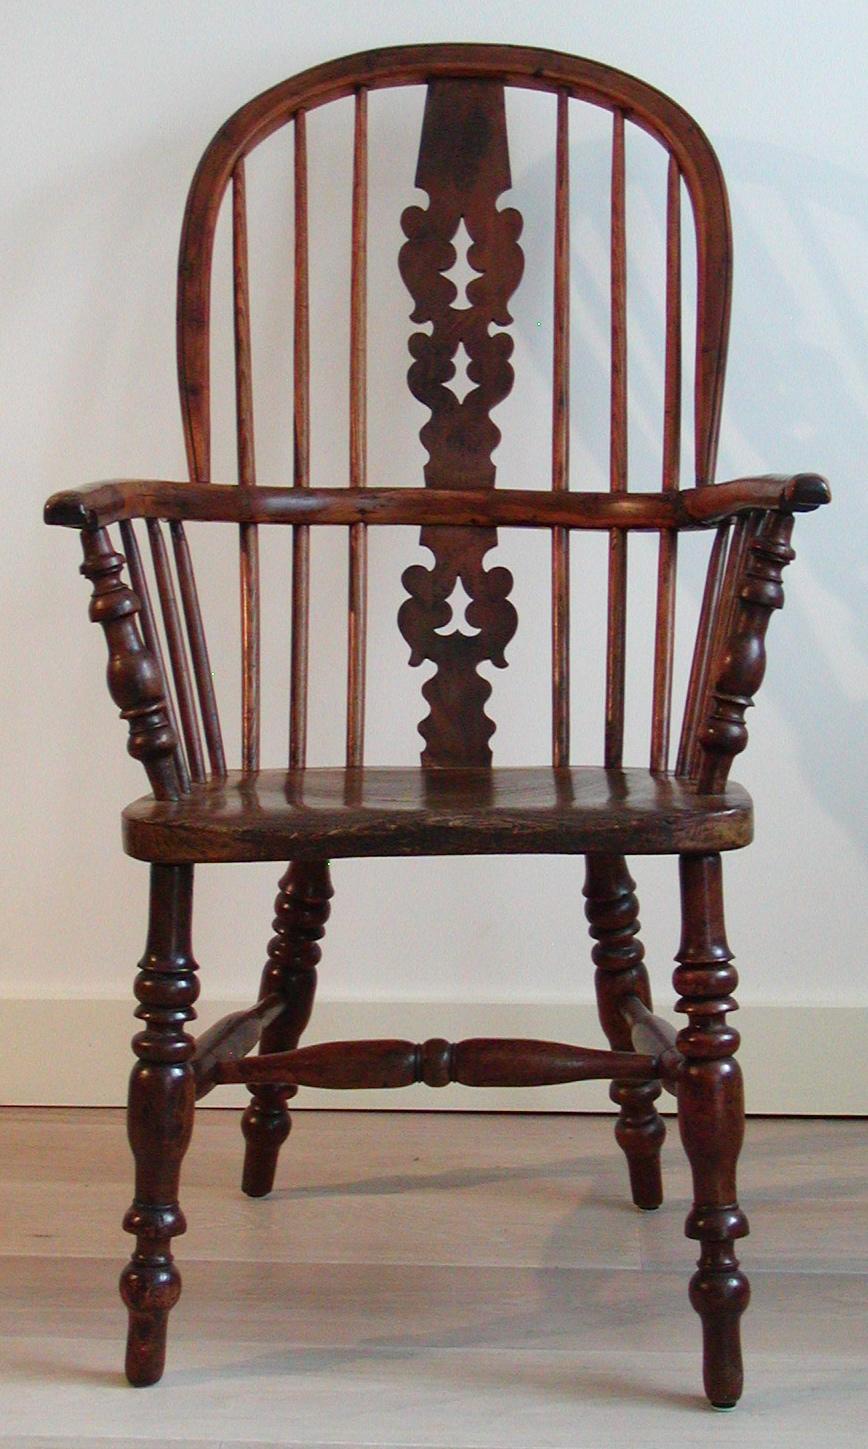 Antique English Victorian large high-back Windsor armchair, crafted of yew, ash and elm, a fir-tree pierced shaped splat, the scroll-ended arms on baluster turned front supports, elm saddle seat, on triple ring turned legs joined by a crinoline